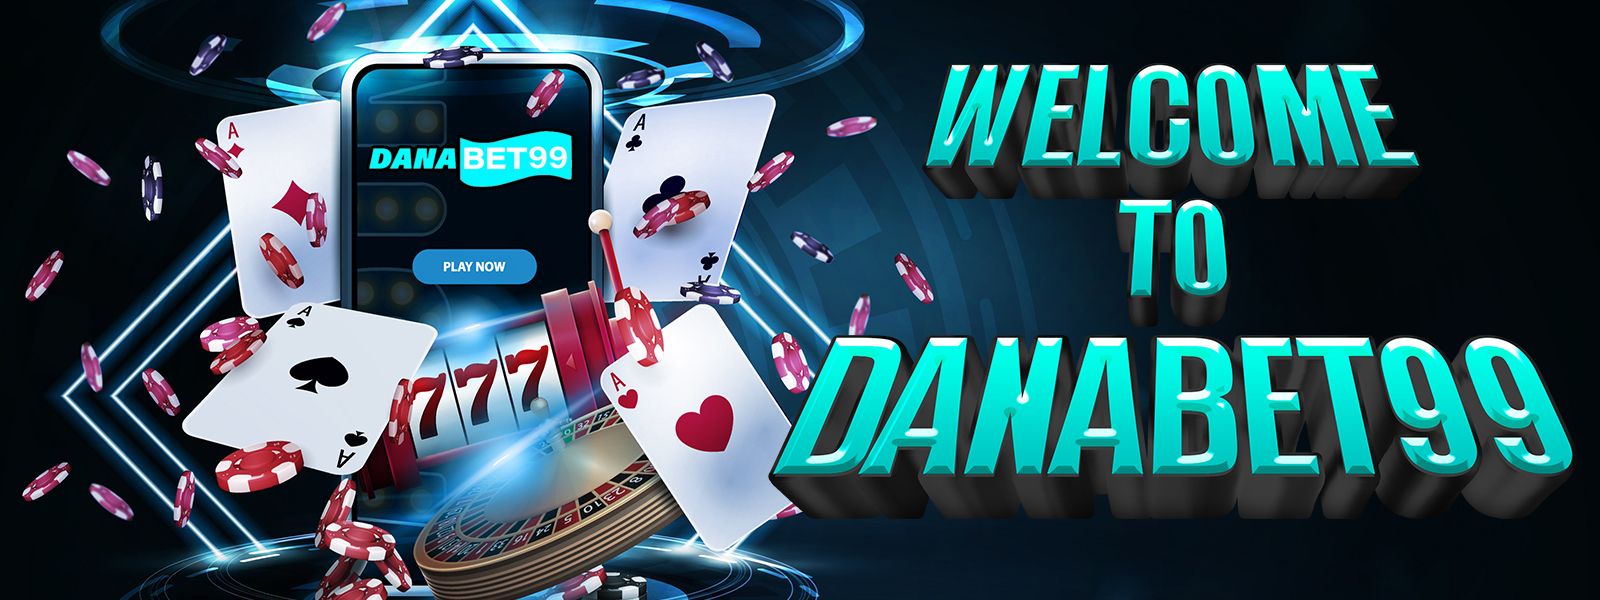 WELCOME TO DANABET99